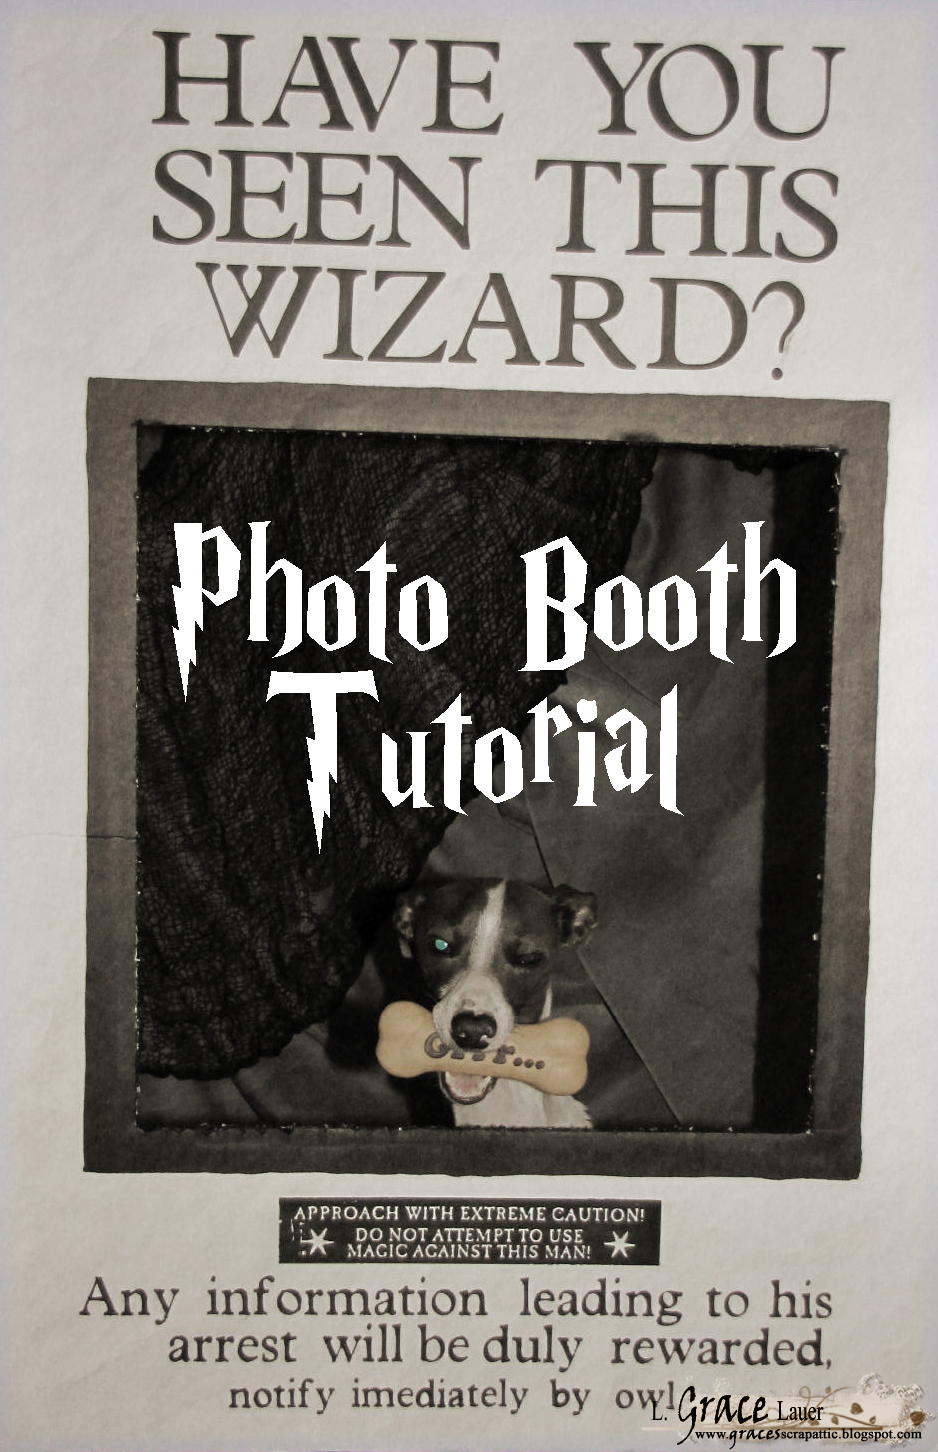 Potter Photo Booth 